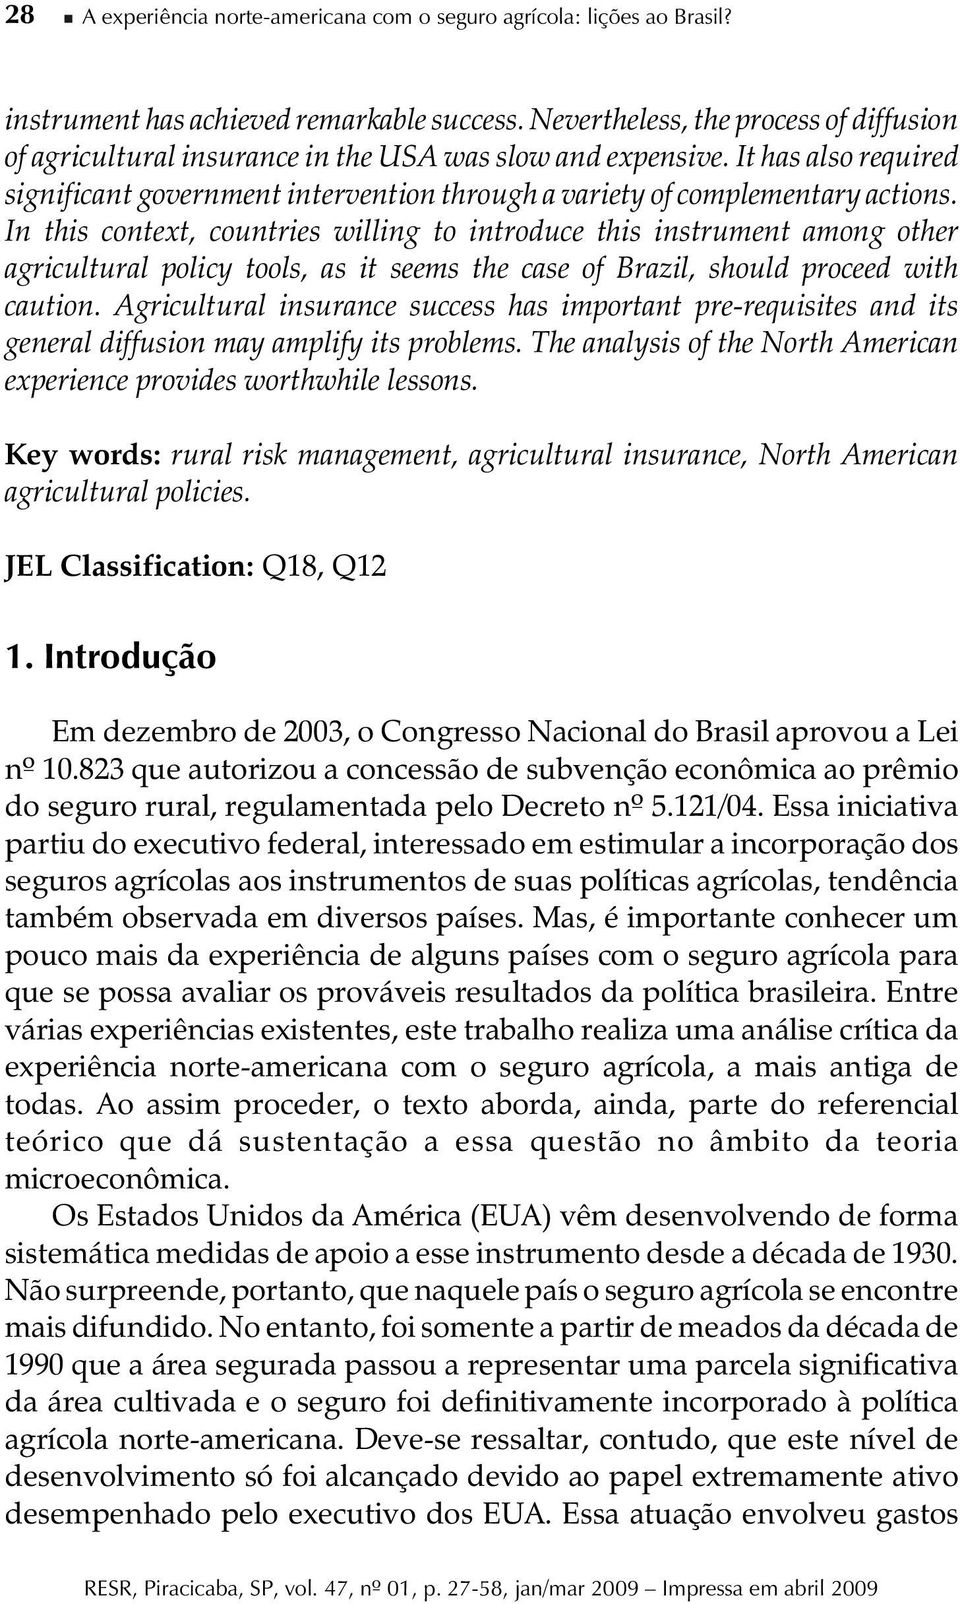 In this context, countries willing to introduce this instrument among other agricultural policy tools, as it seems the case of Brazil, should proceed with caution.